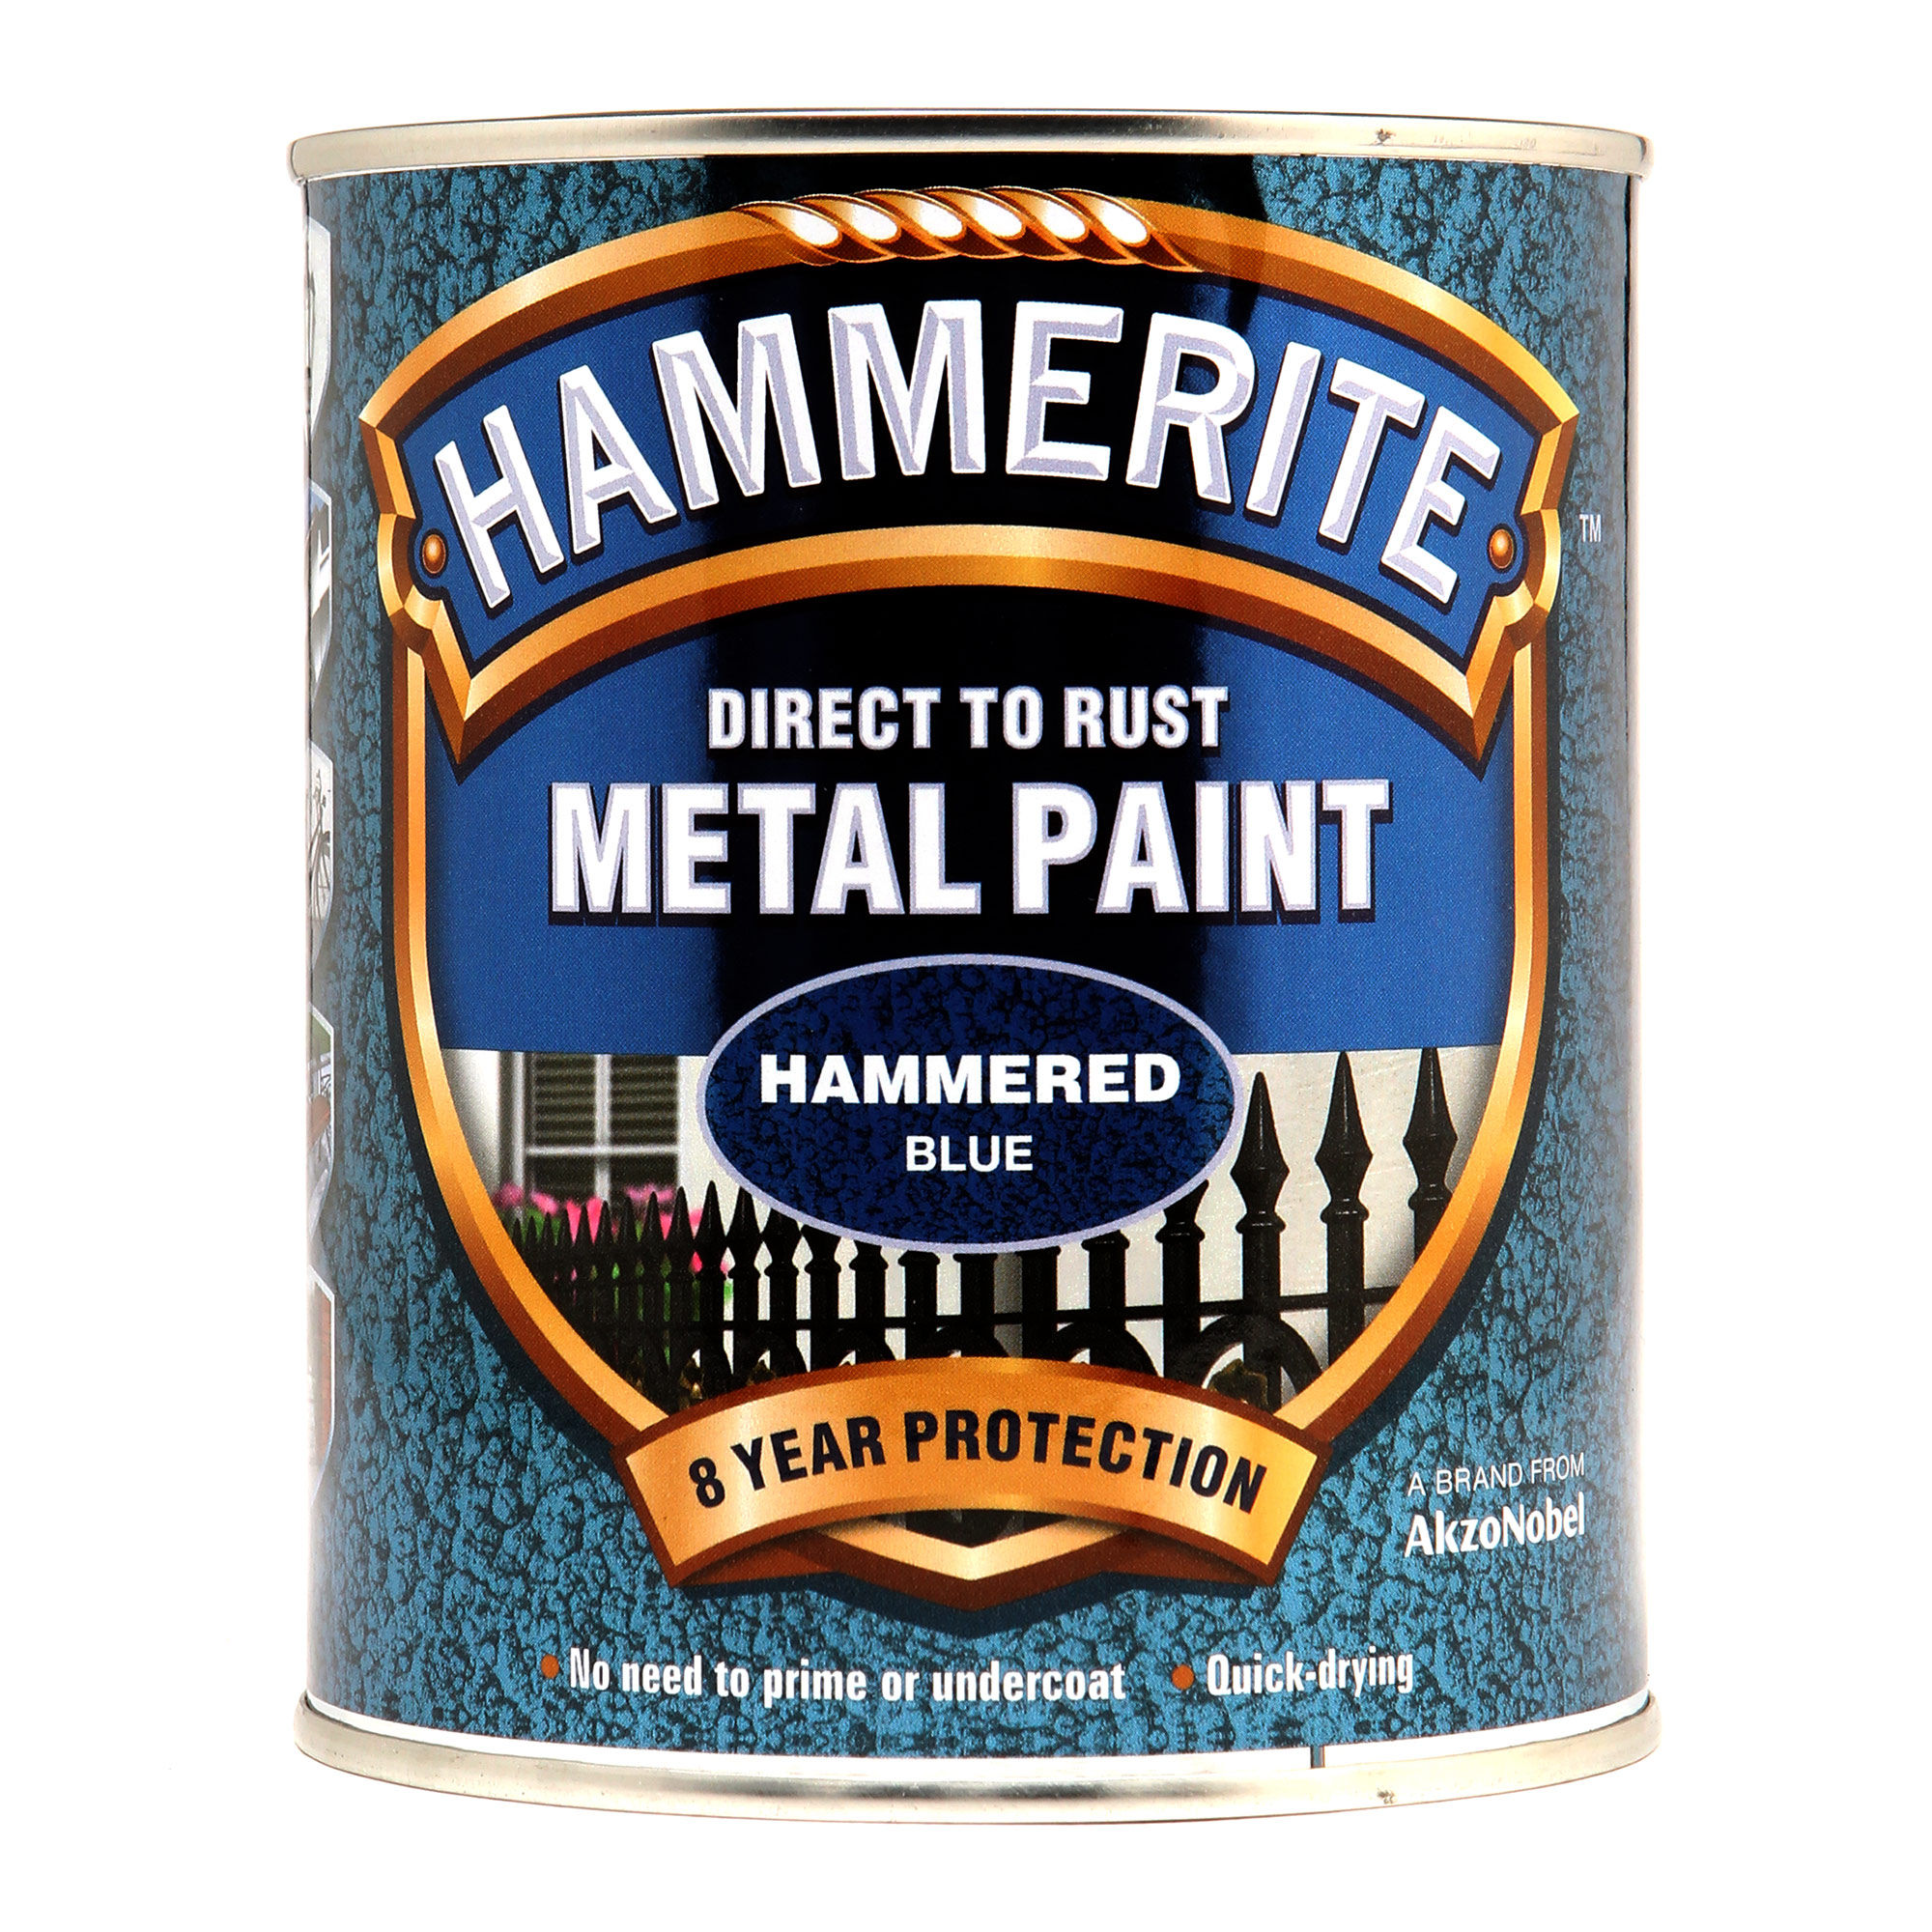 Hammerite Direct to Rust Metal Paint Hammered Finish Blue